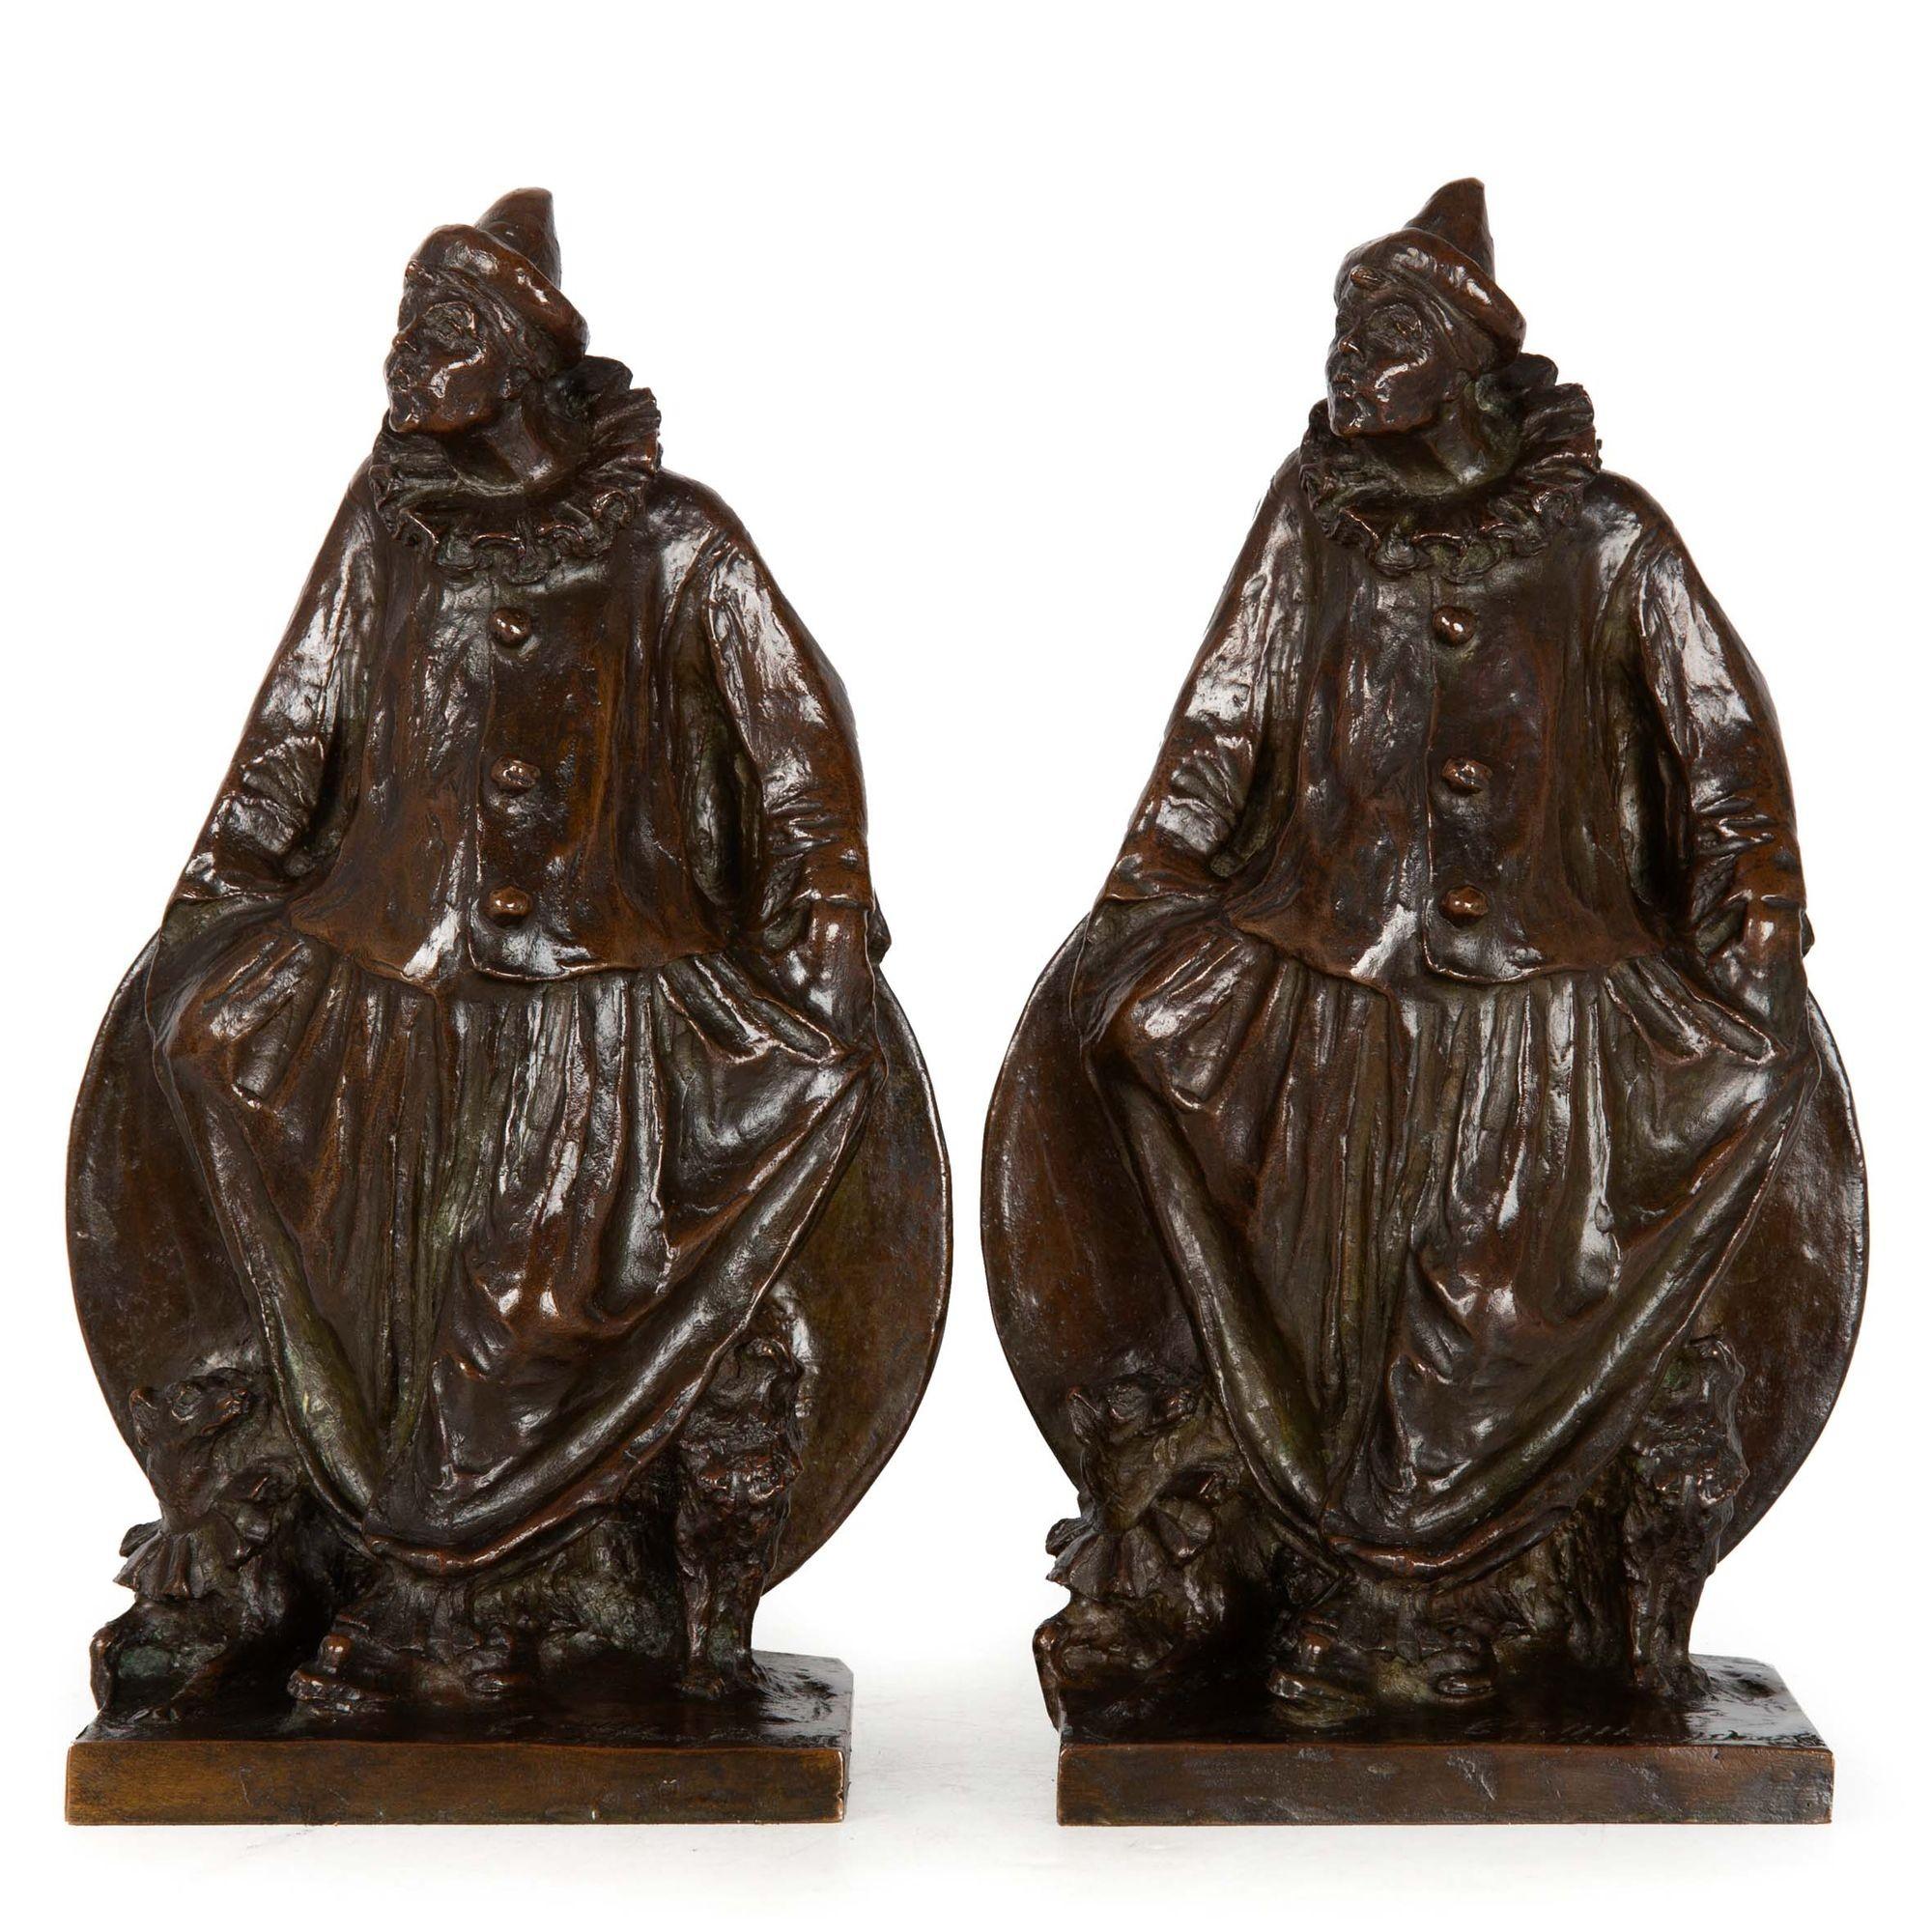 An exquisitely cast pair of Clowns, each depicted with a pair of dogs at their feet also dressed up for the show. These were conceived by Charles Humphriss in 1912 and were cast in pairs as bookends by Roman Bronze Works in New York for the